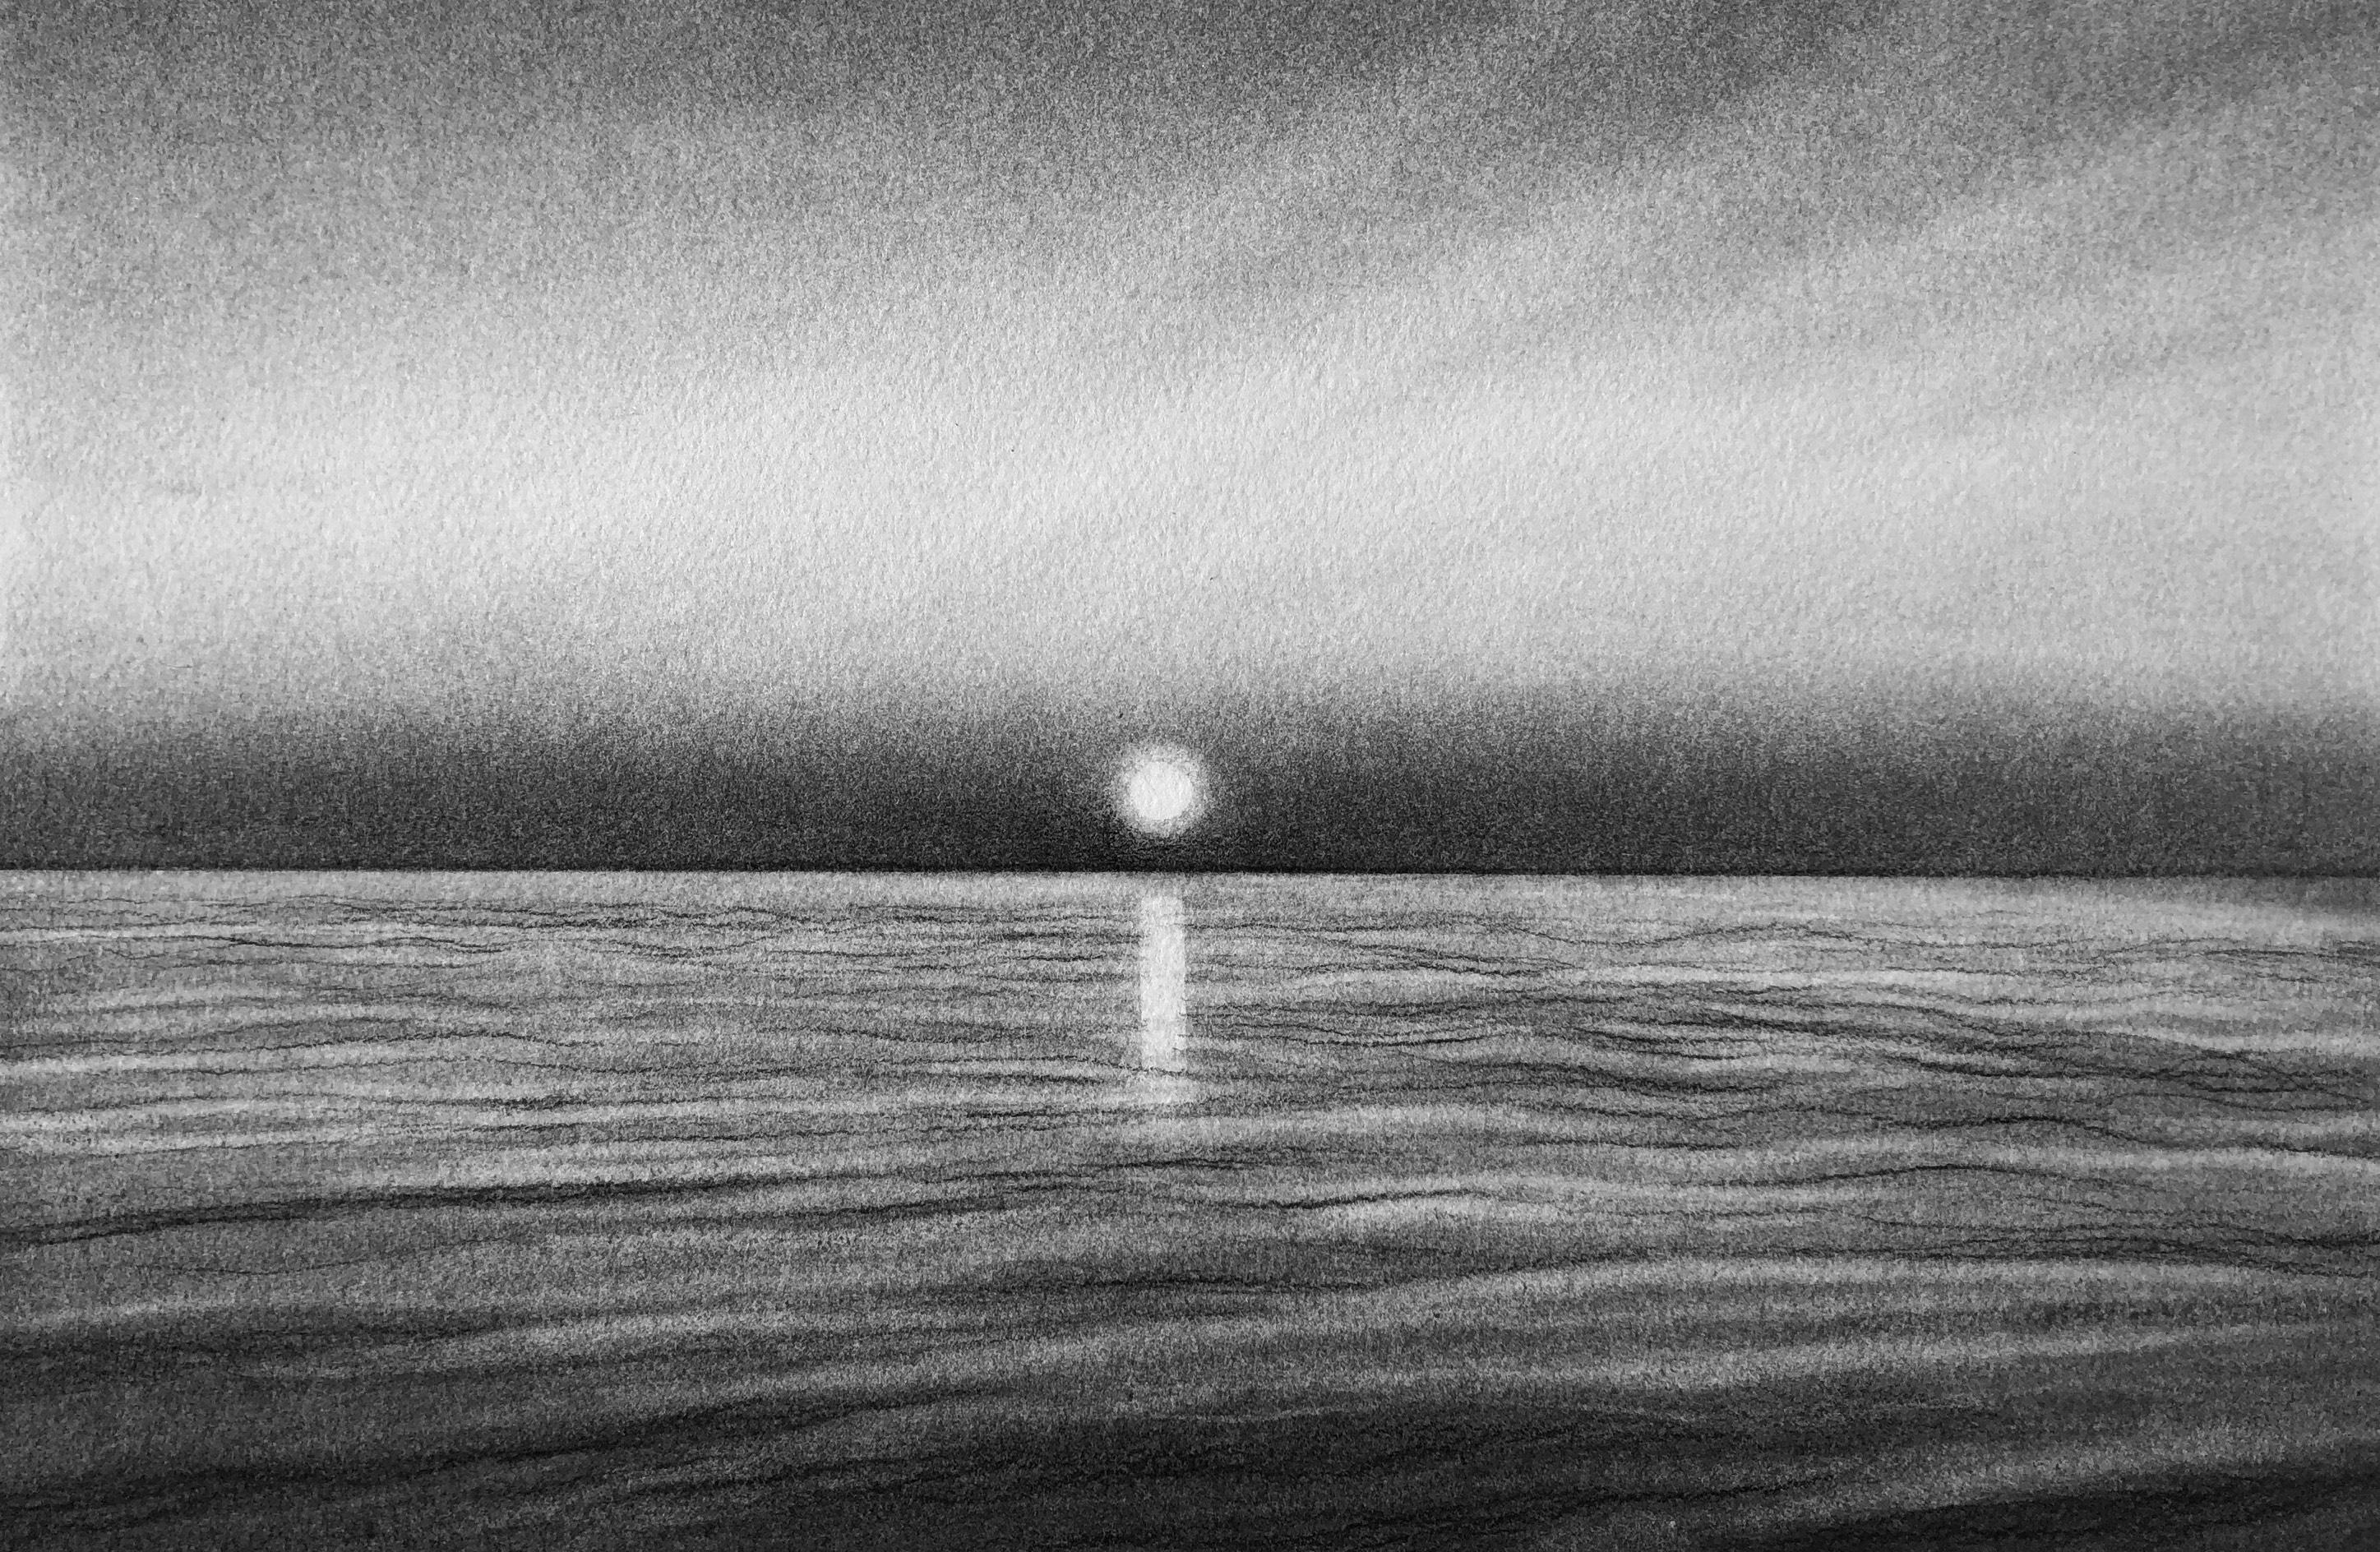 Katherine Curci Figurative Art - Strawberry Island Sunset, black and white charcoal drawing of the ocean